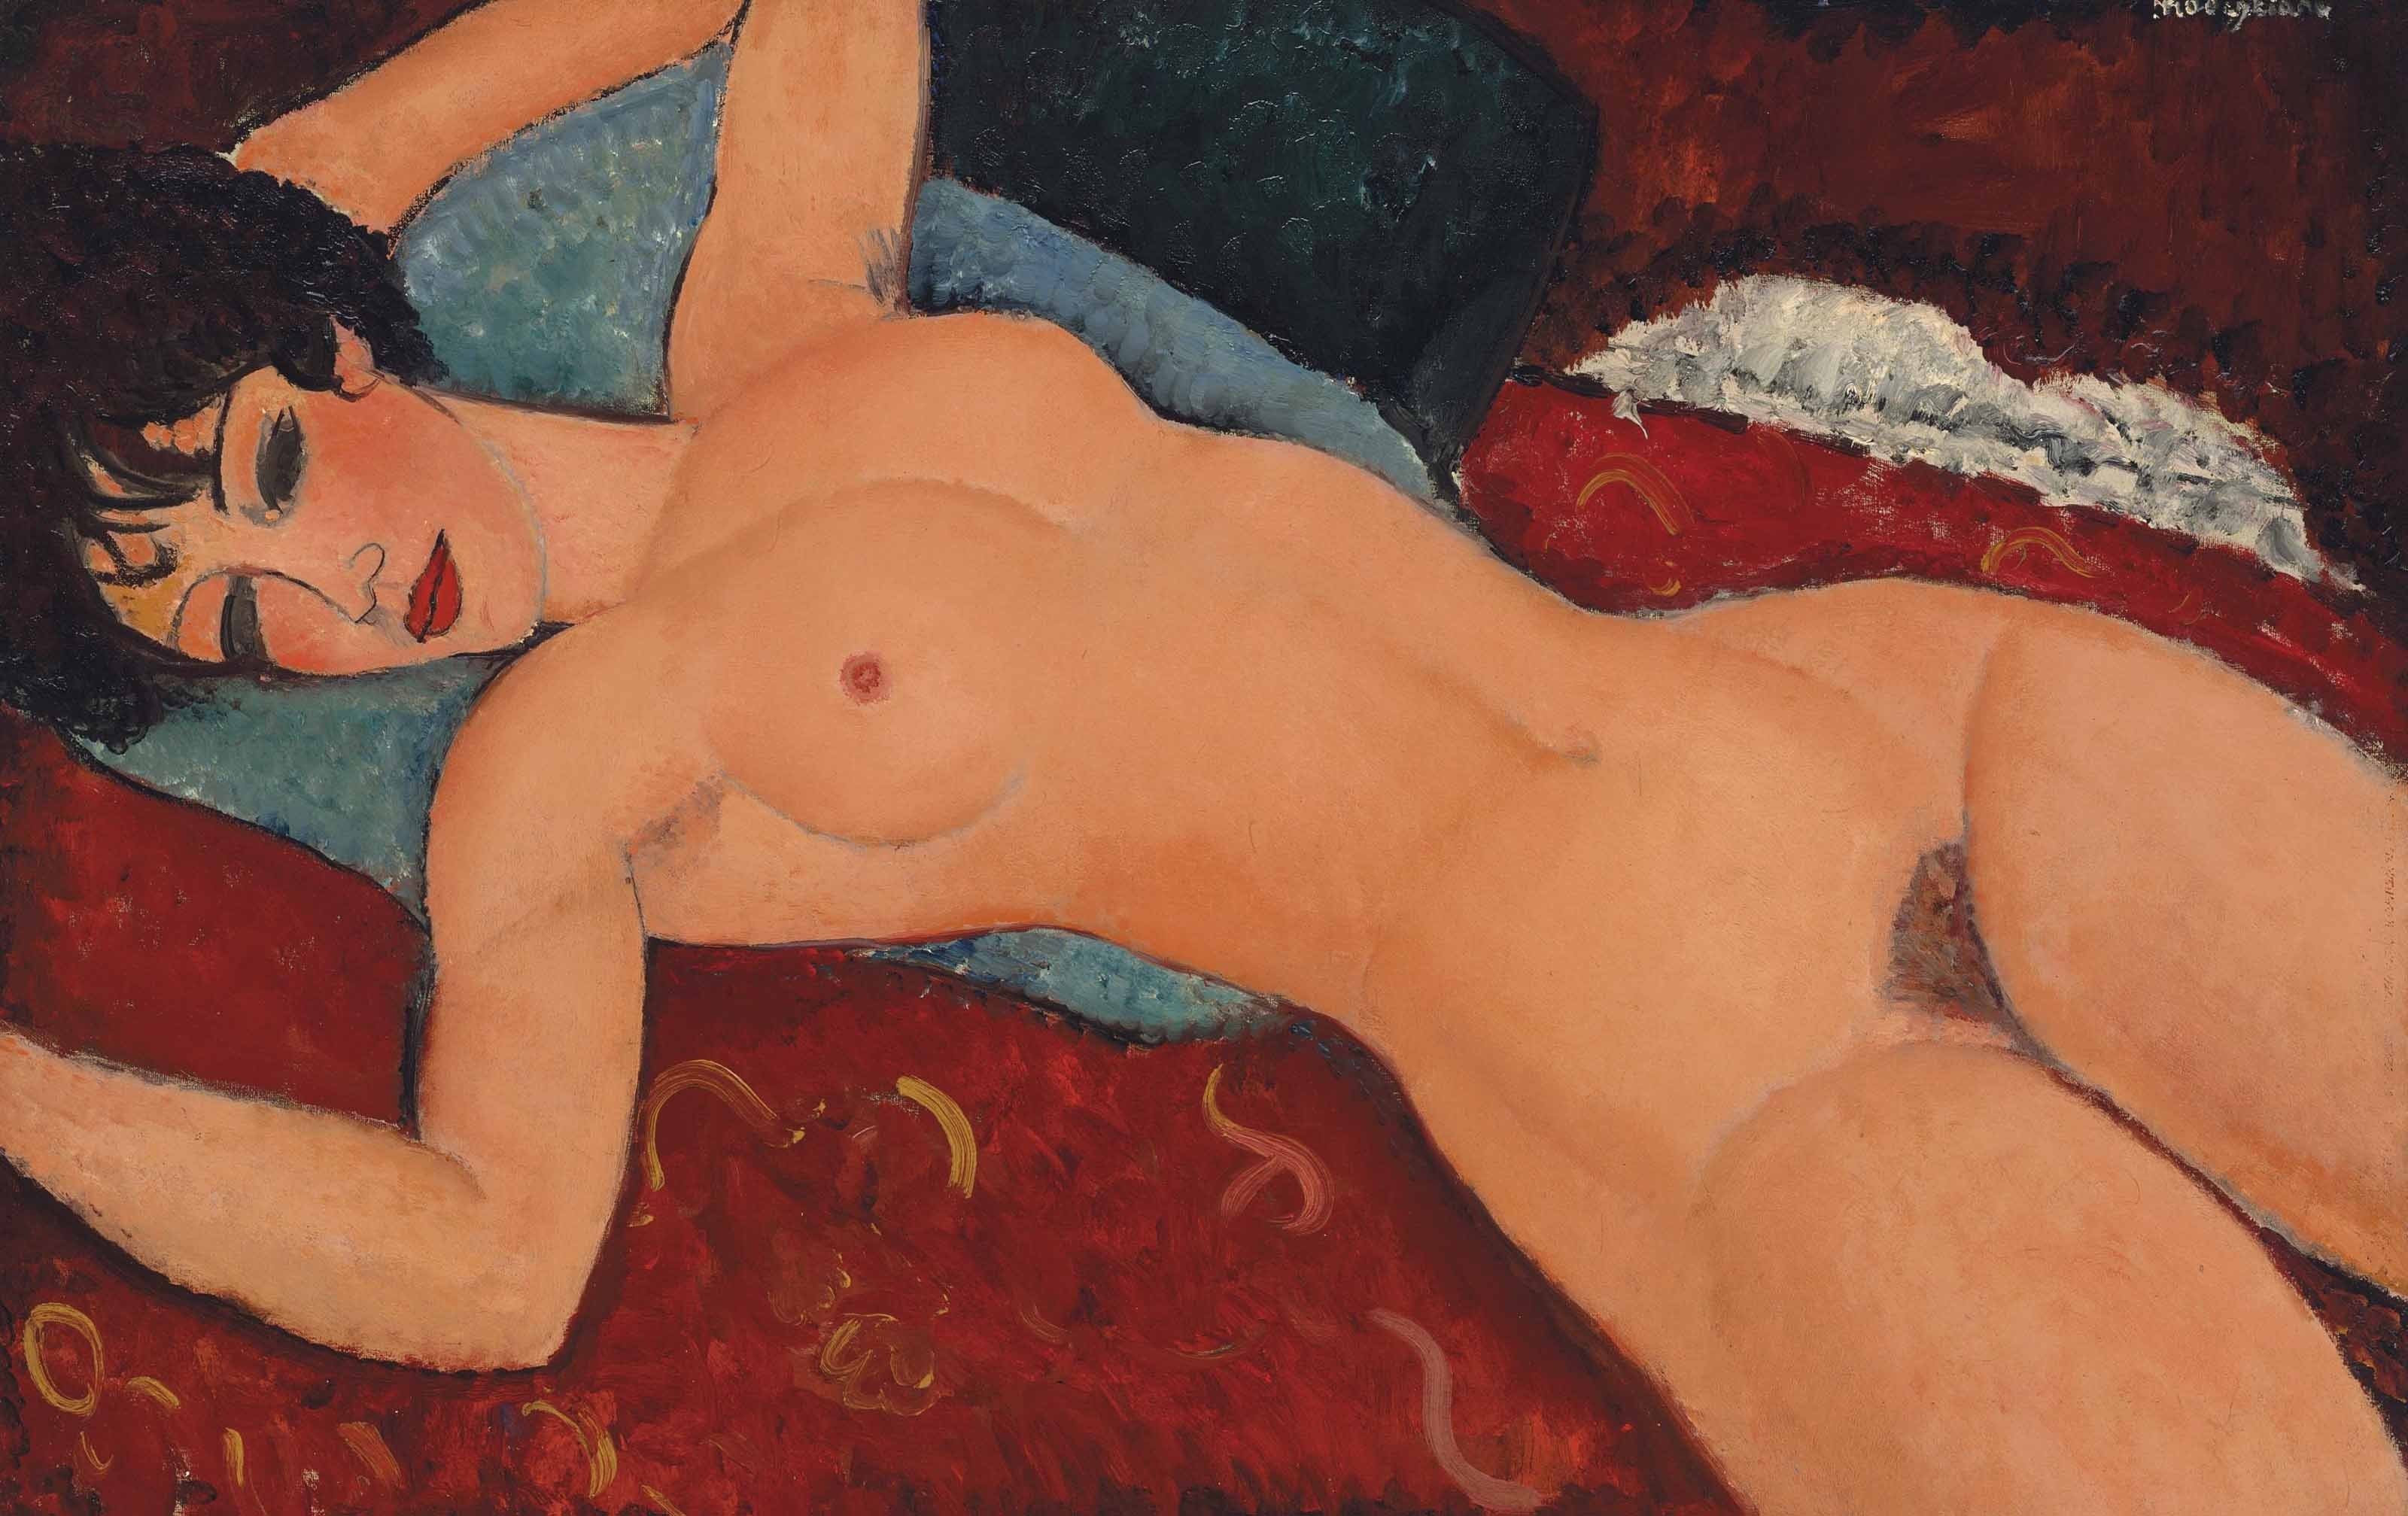 Nu couché (The Red Nude) by Amedeo Modigliani - 1917-1918 - 59.9 x 92 cm private collection